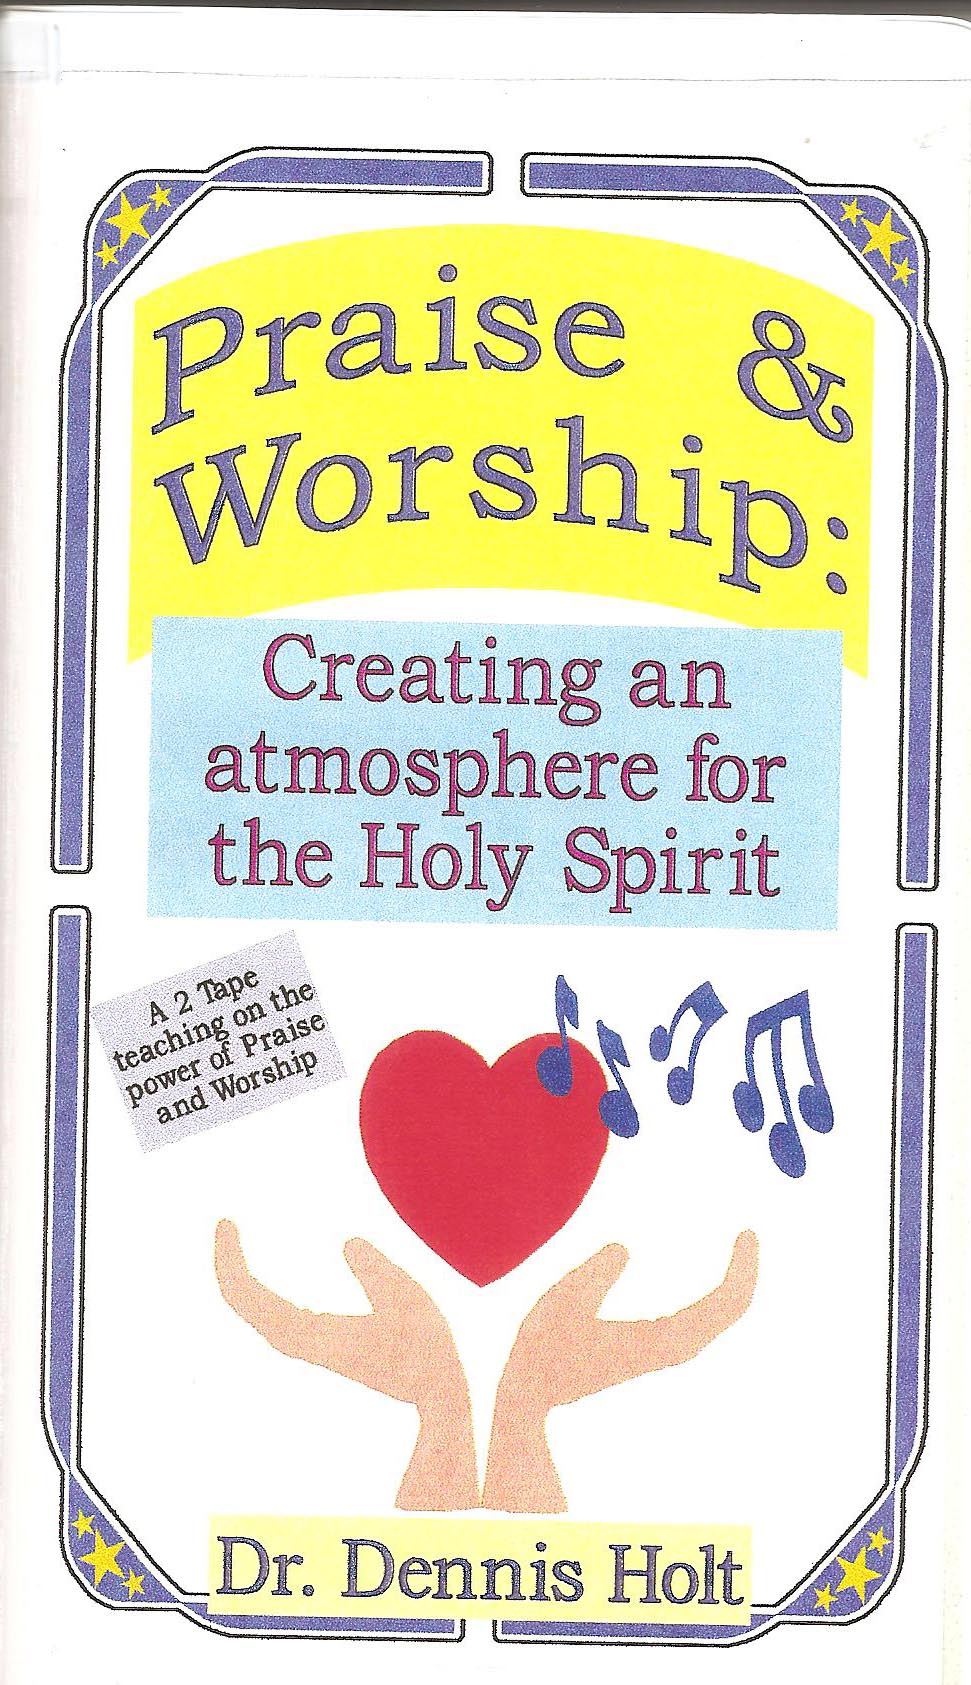 Songs for Praise and Worship   VOl 1  CD1 & CD2 